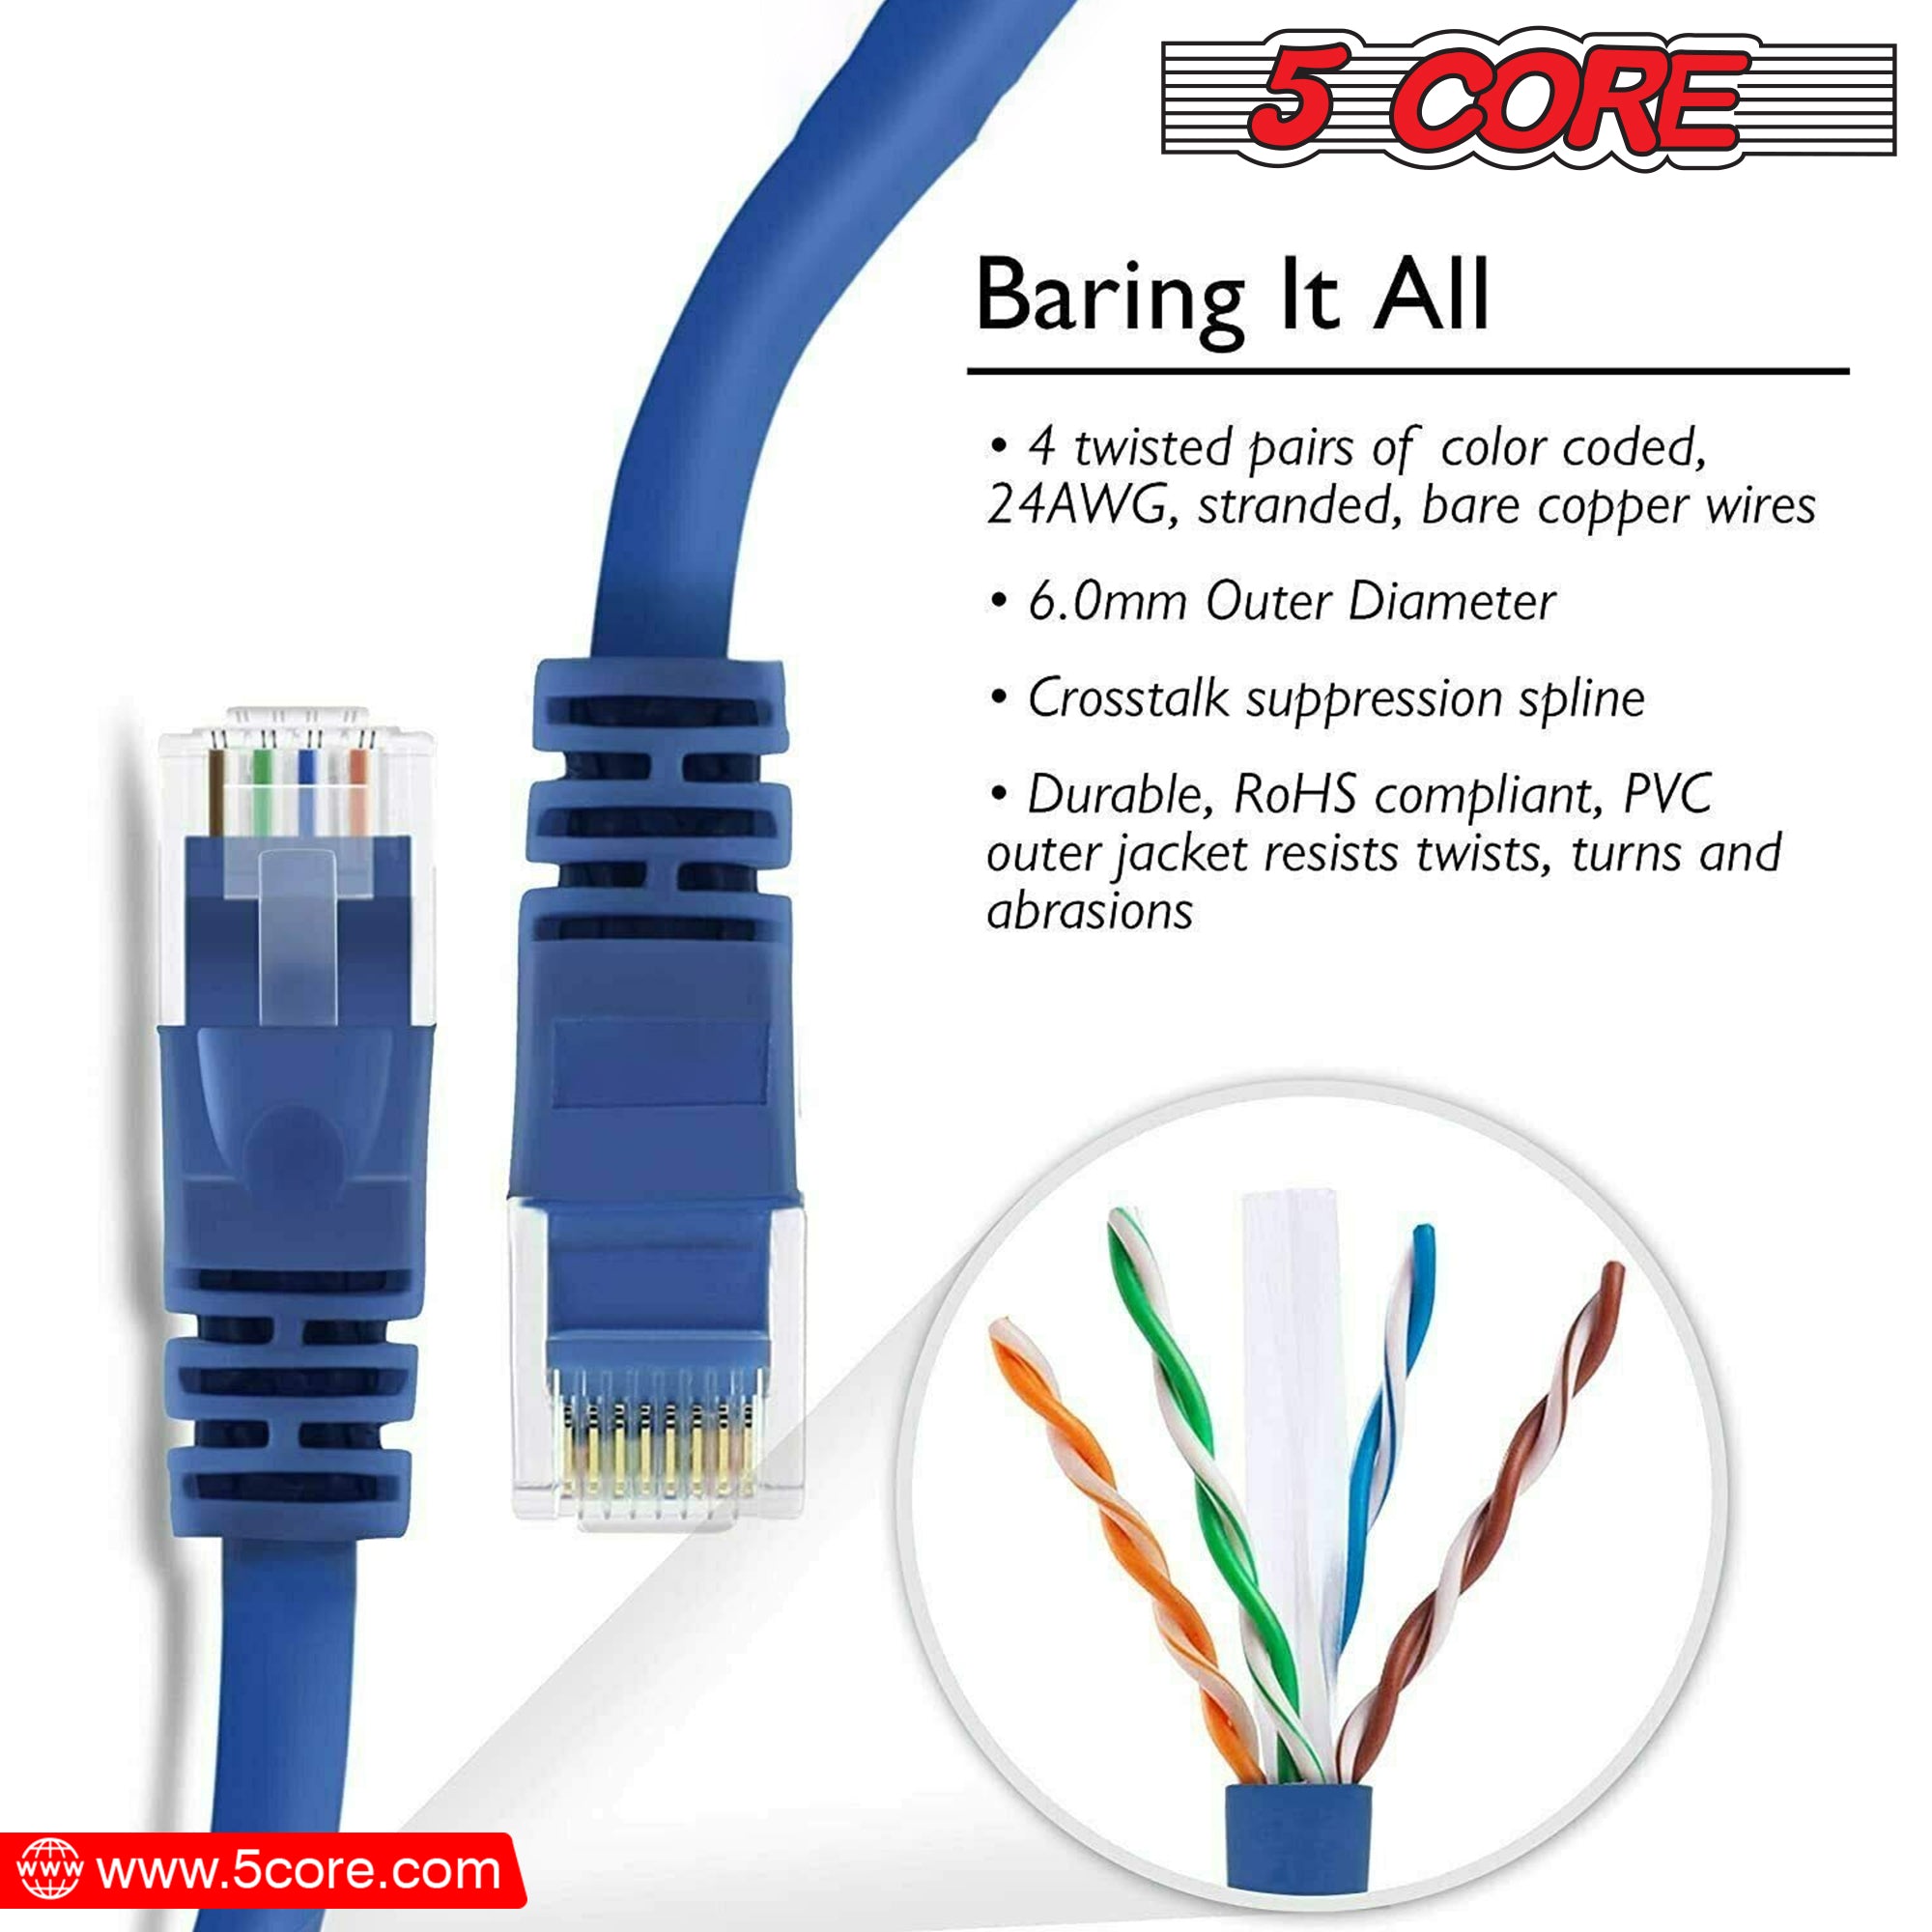 High speed network cable